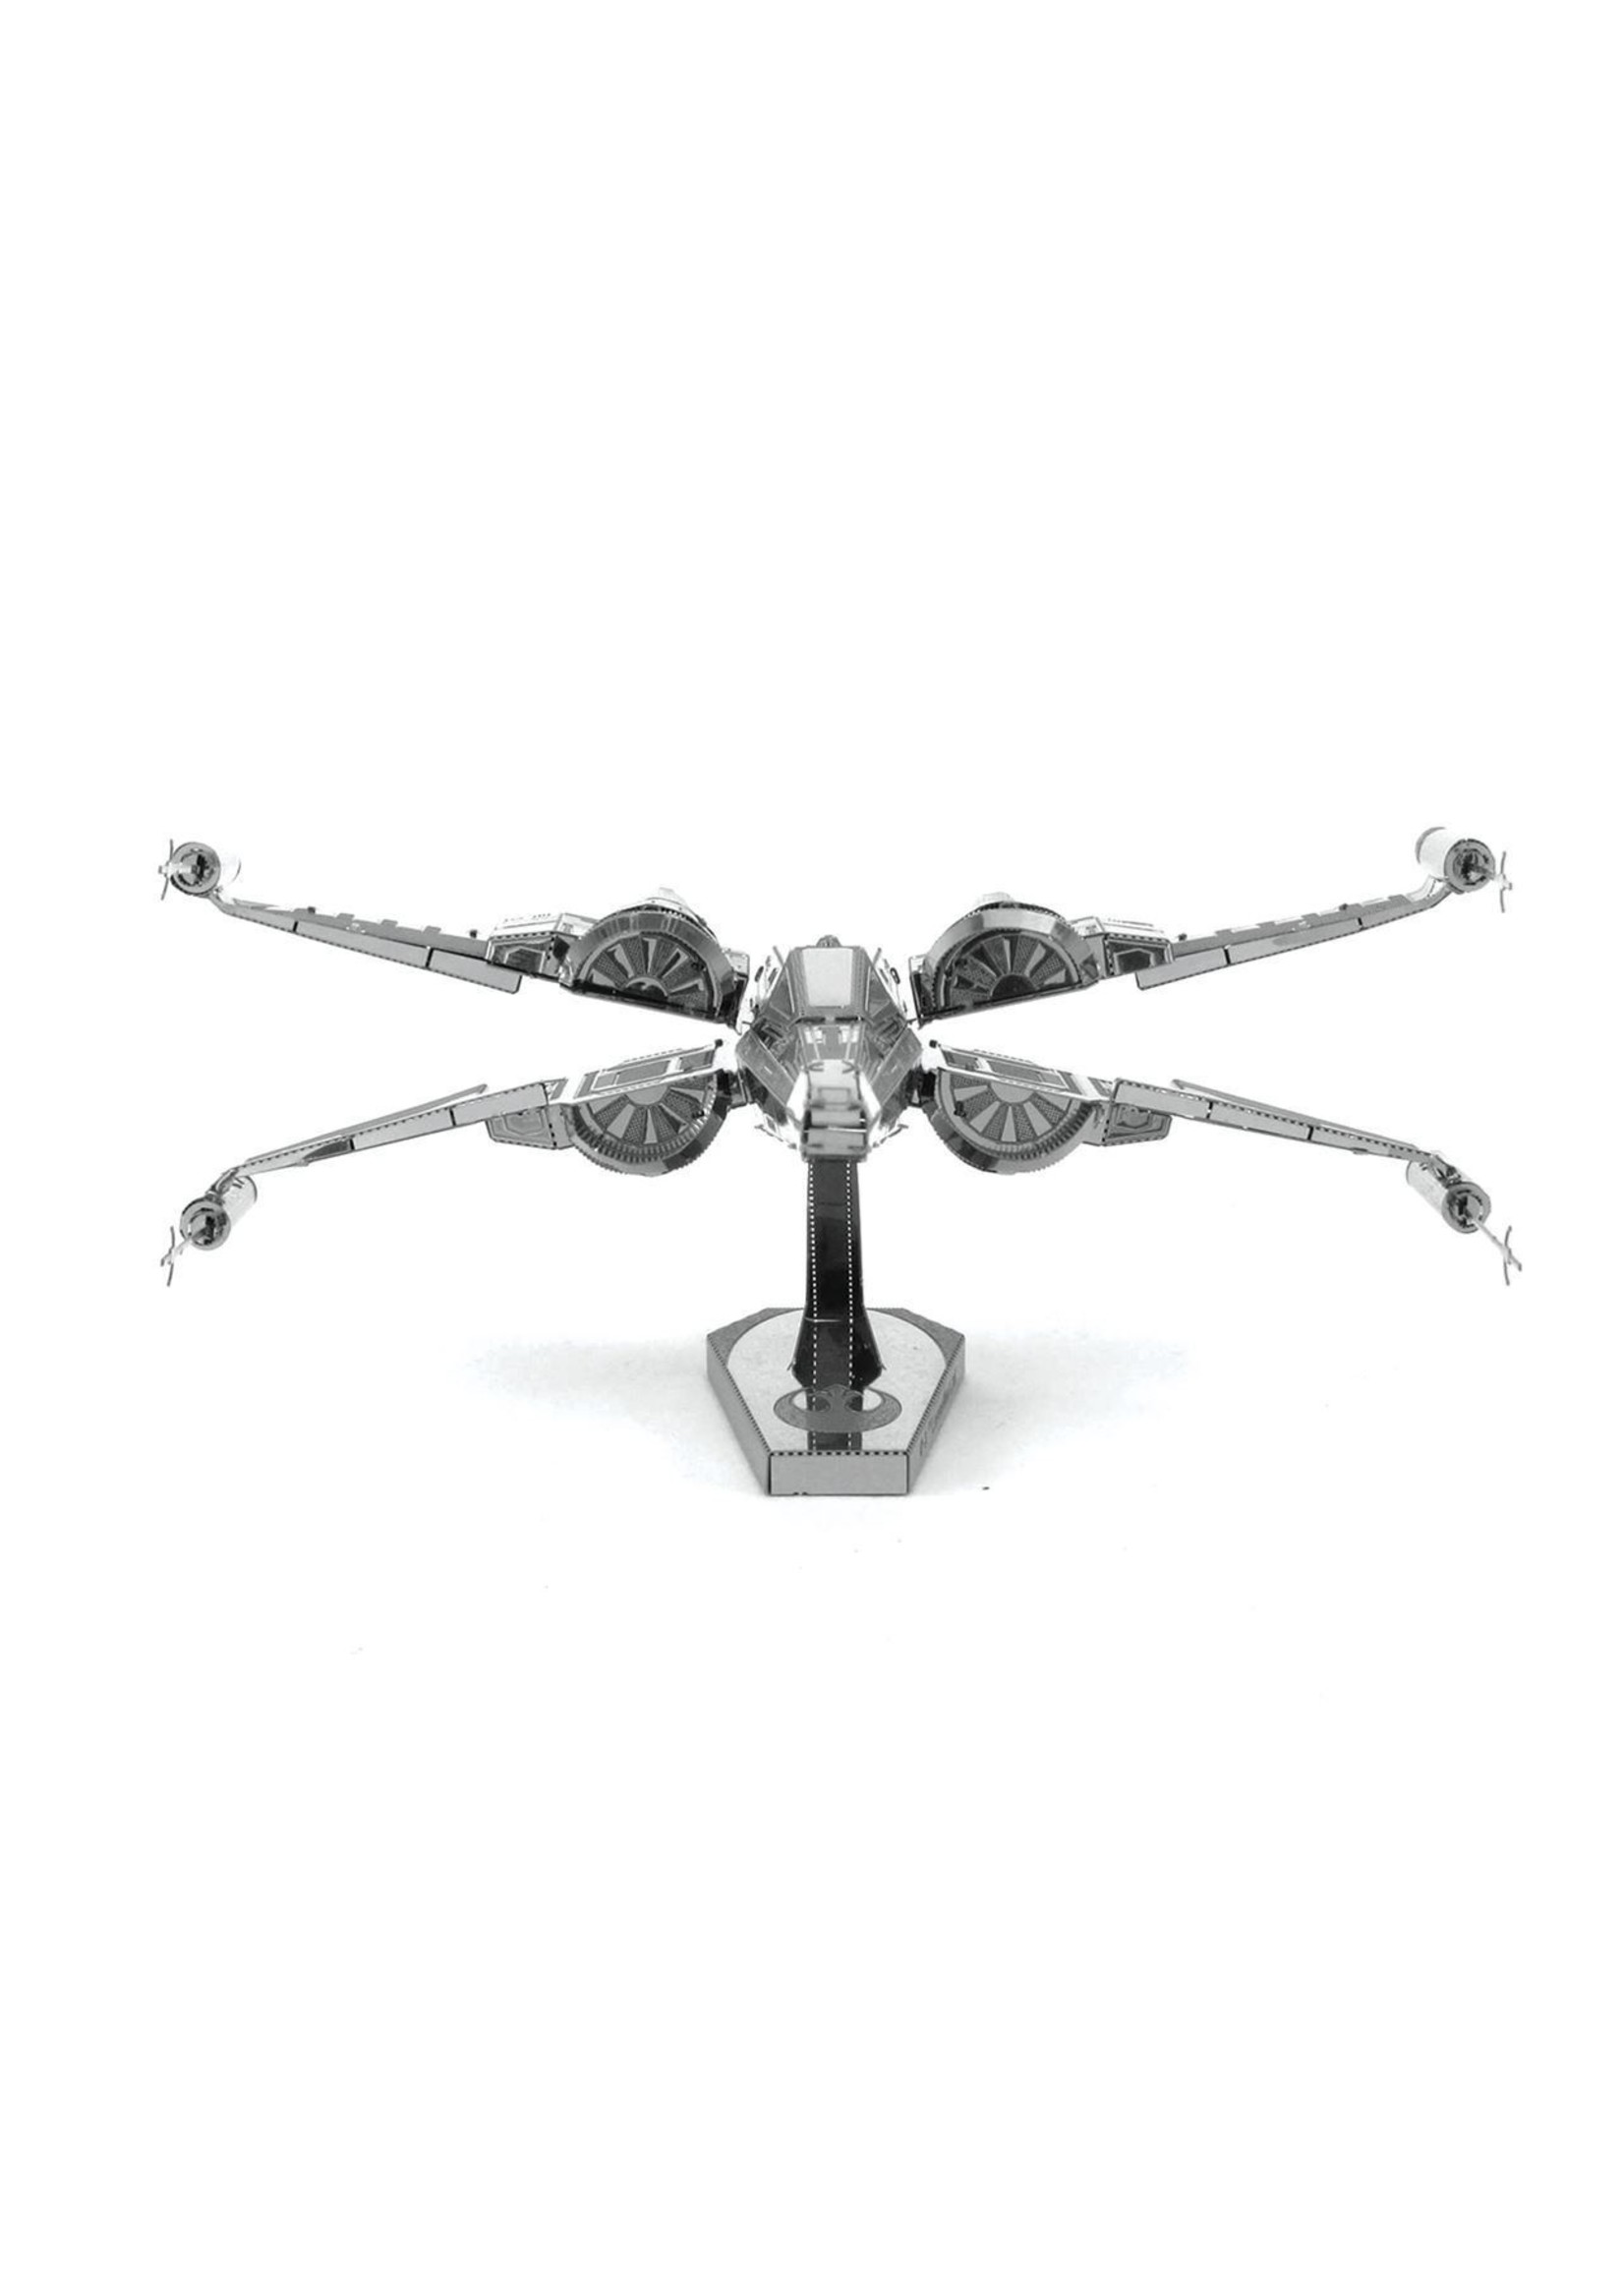 Fascinations Metal Earth - Star Wars Poe Dameron's X-Wing Fighter